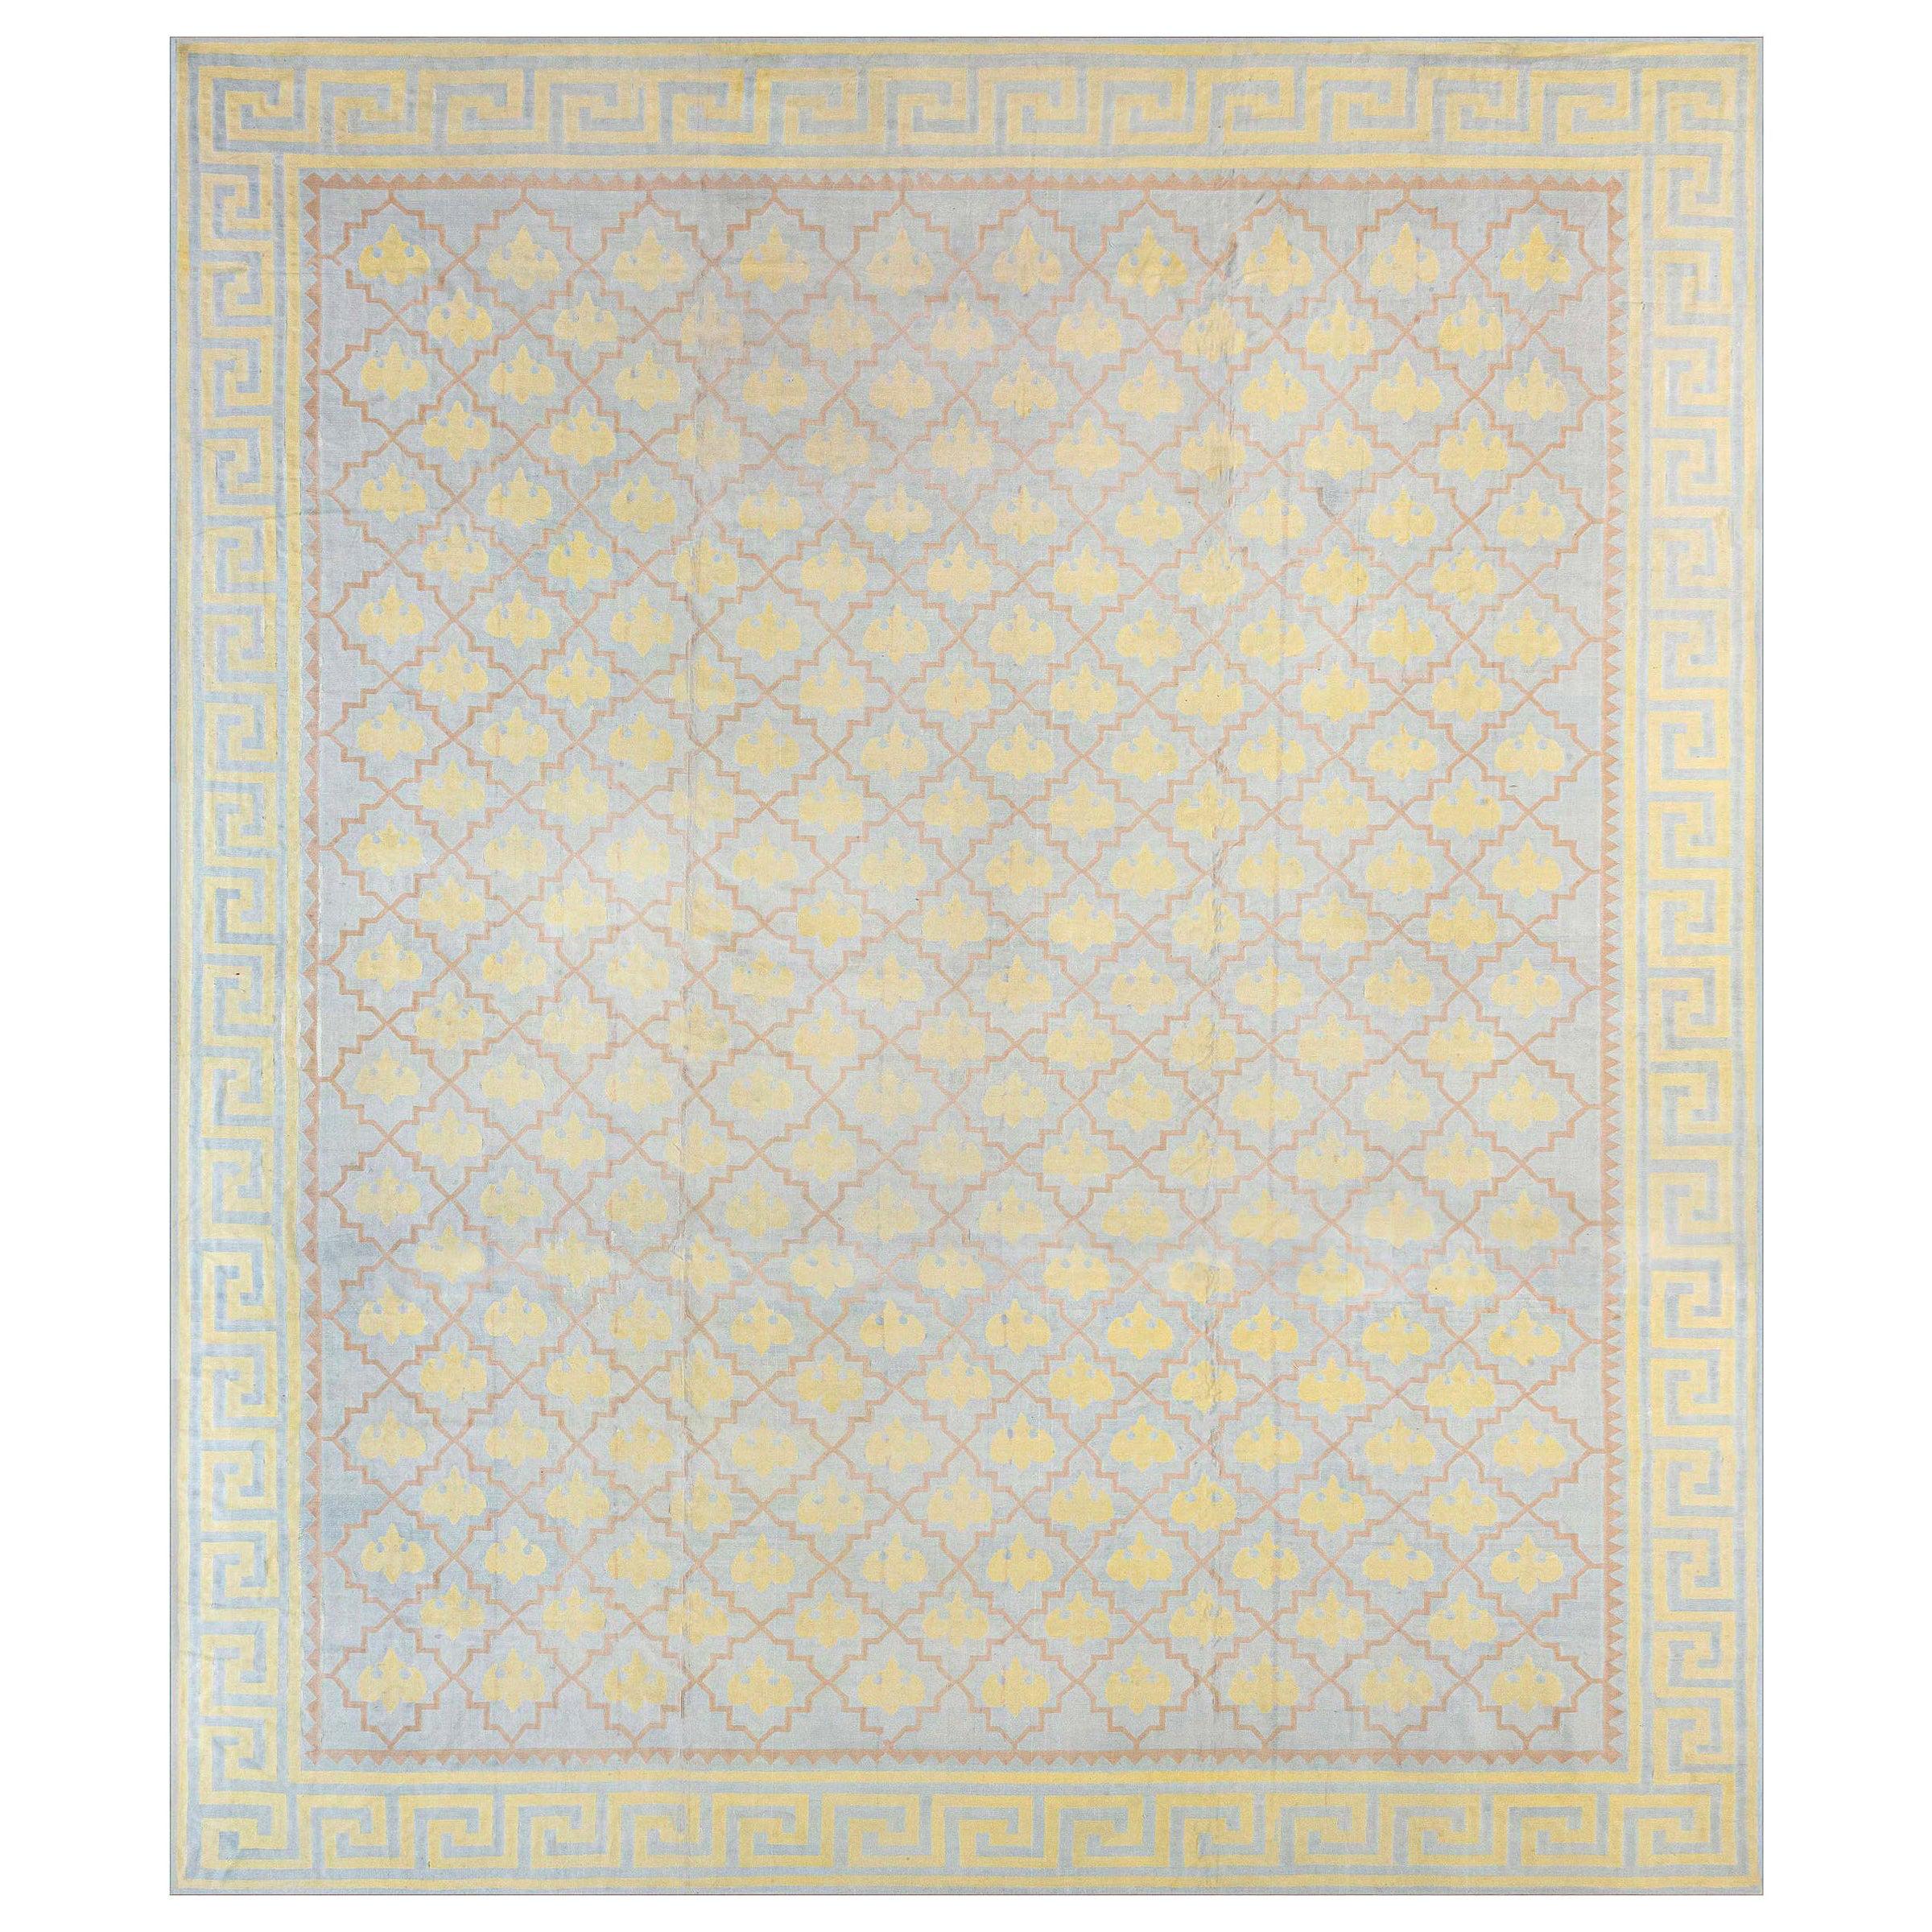 Golden Yellow Indian Dhurrie Carpet, Large Dhurrie Rugs